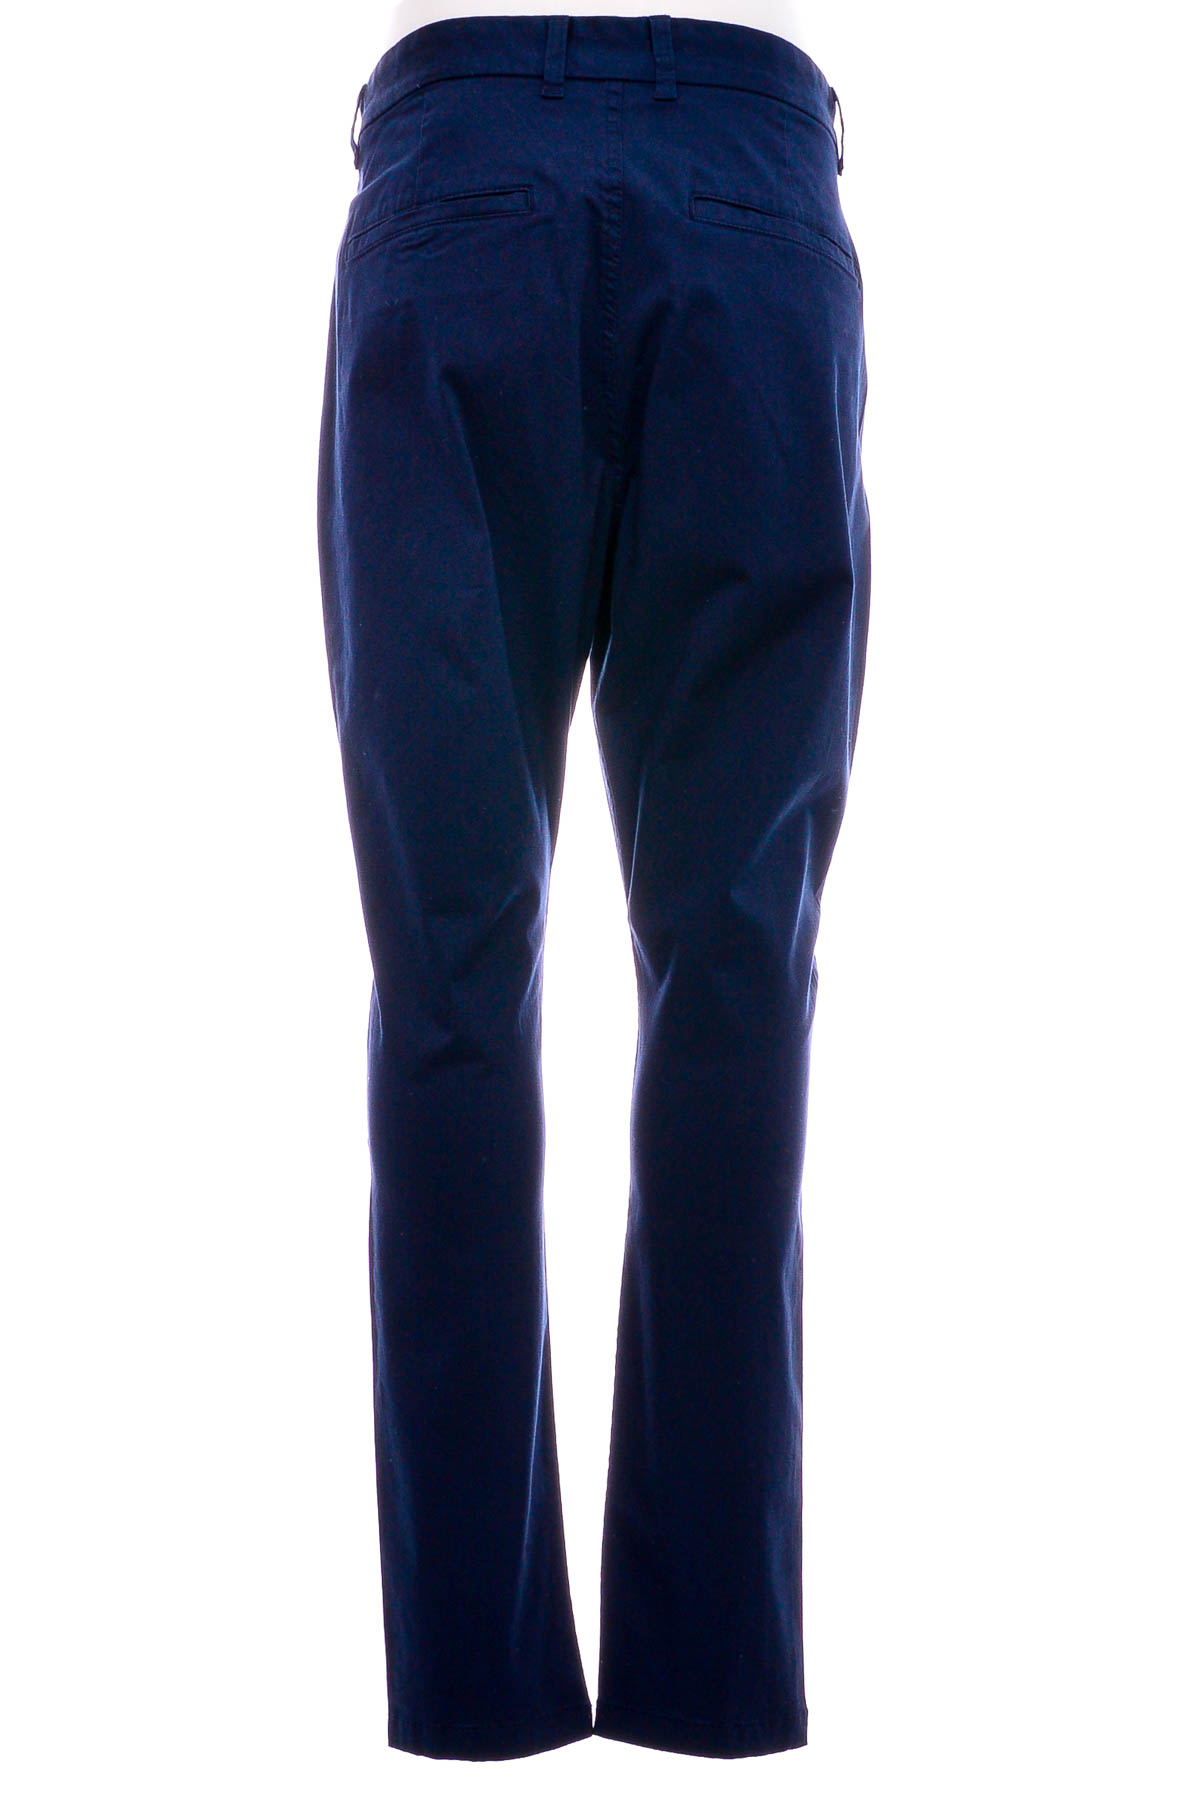 Men's trousers - DIVIDED - 1